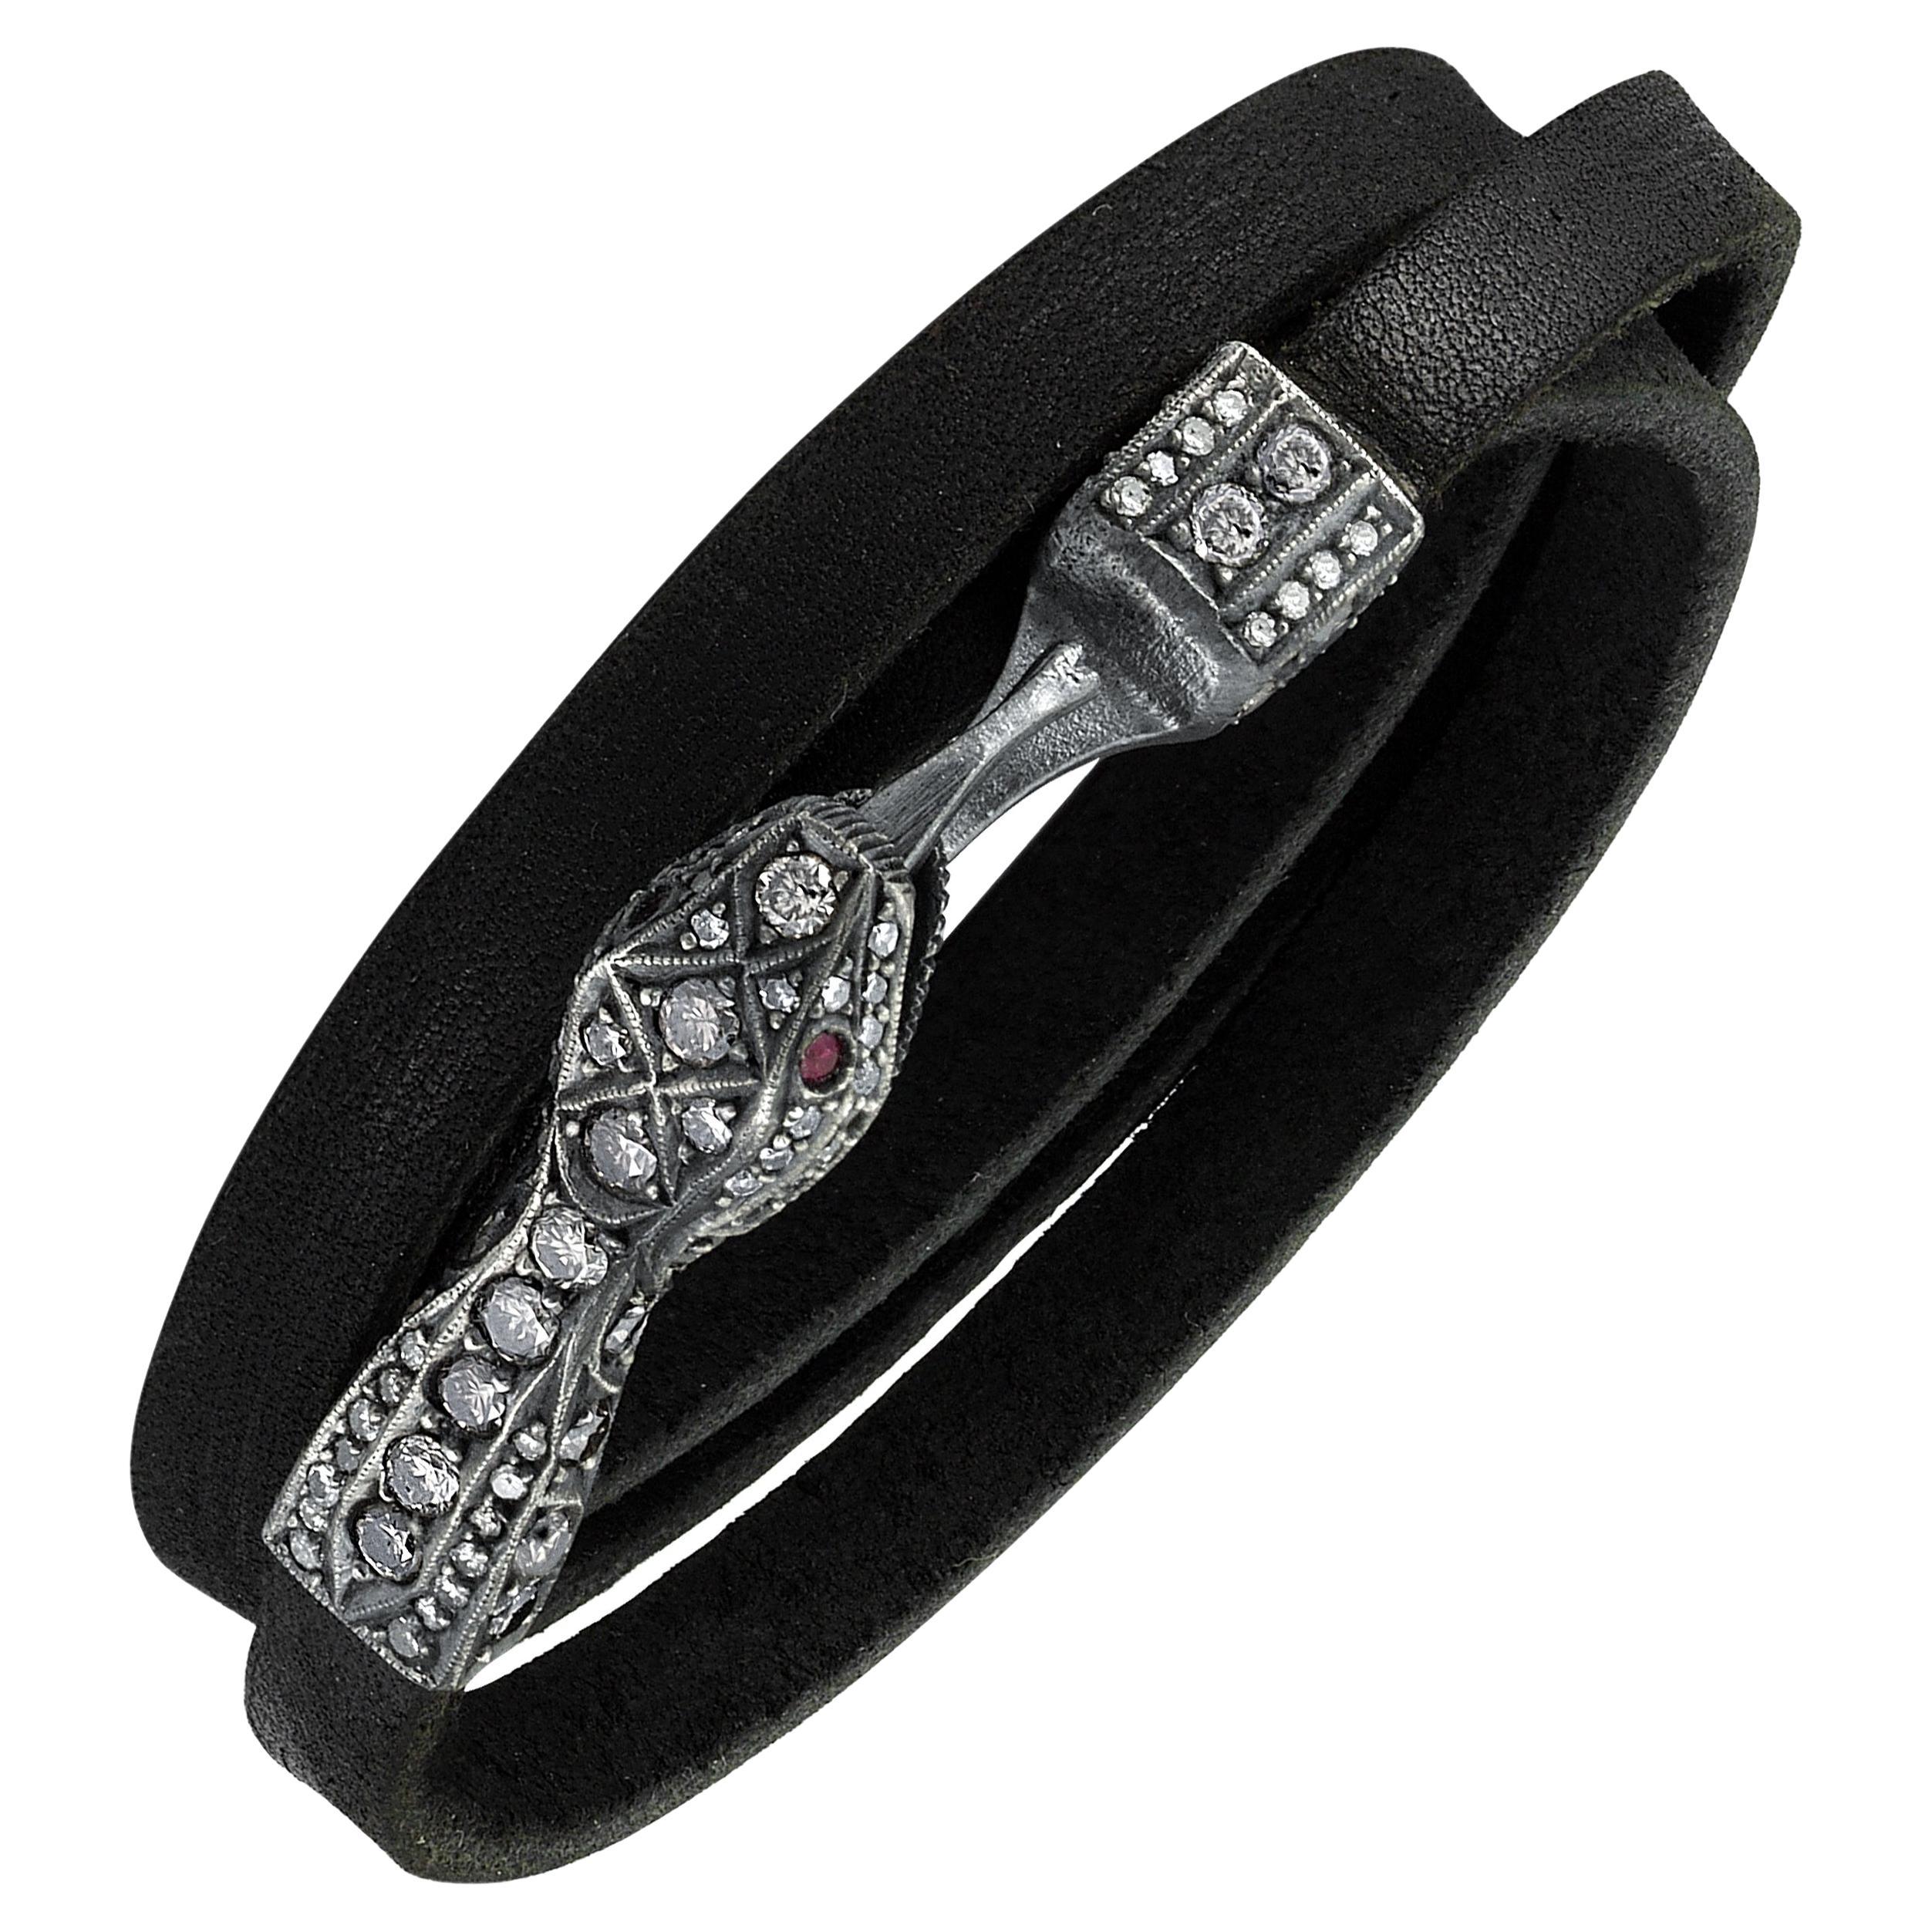 Ruby and Pave Diamond Oxidized Silver Serpent Bracelet with Black Leather Strap